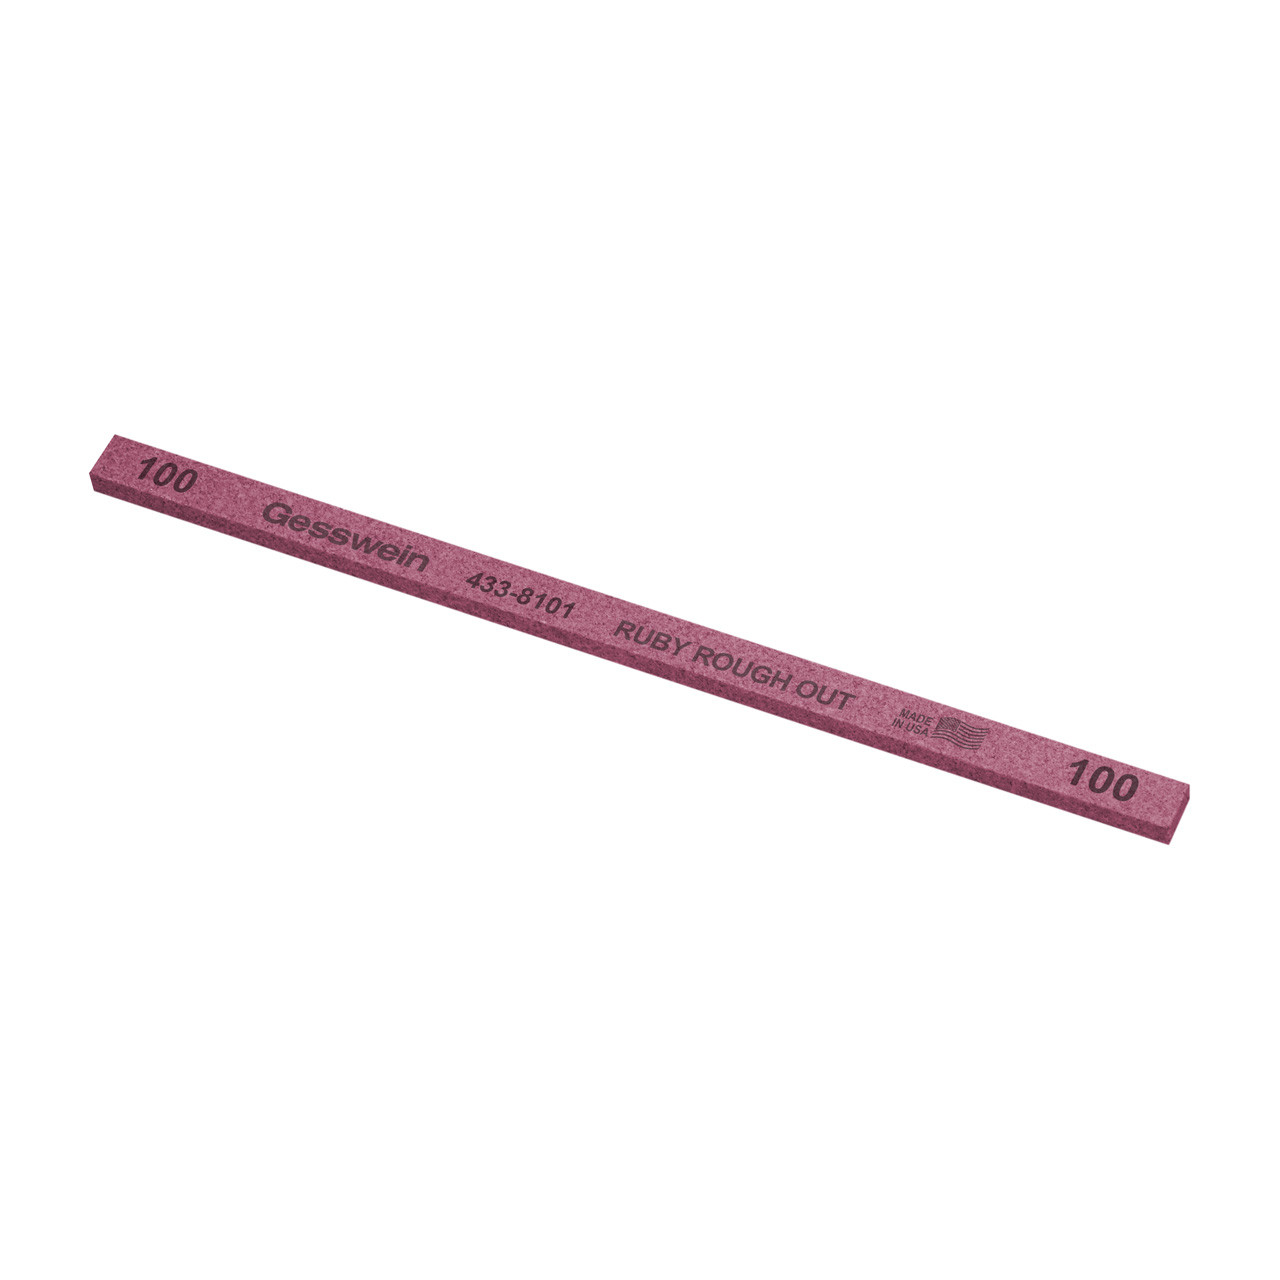 Gesswein® Ruby Rough Out Stone - 1/4" x 1/8" x 6", 100 Grit  (Pkg. of 12)